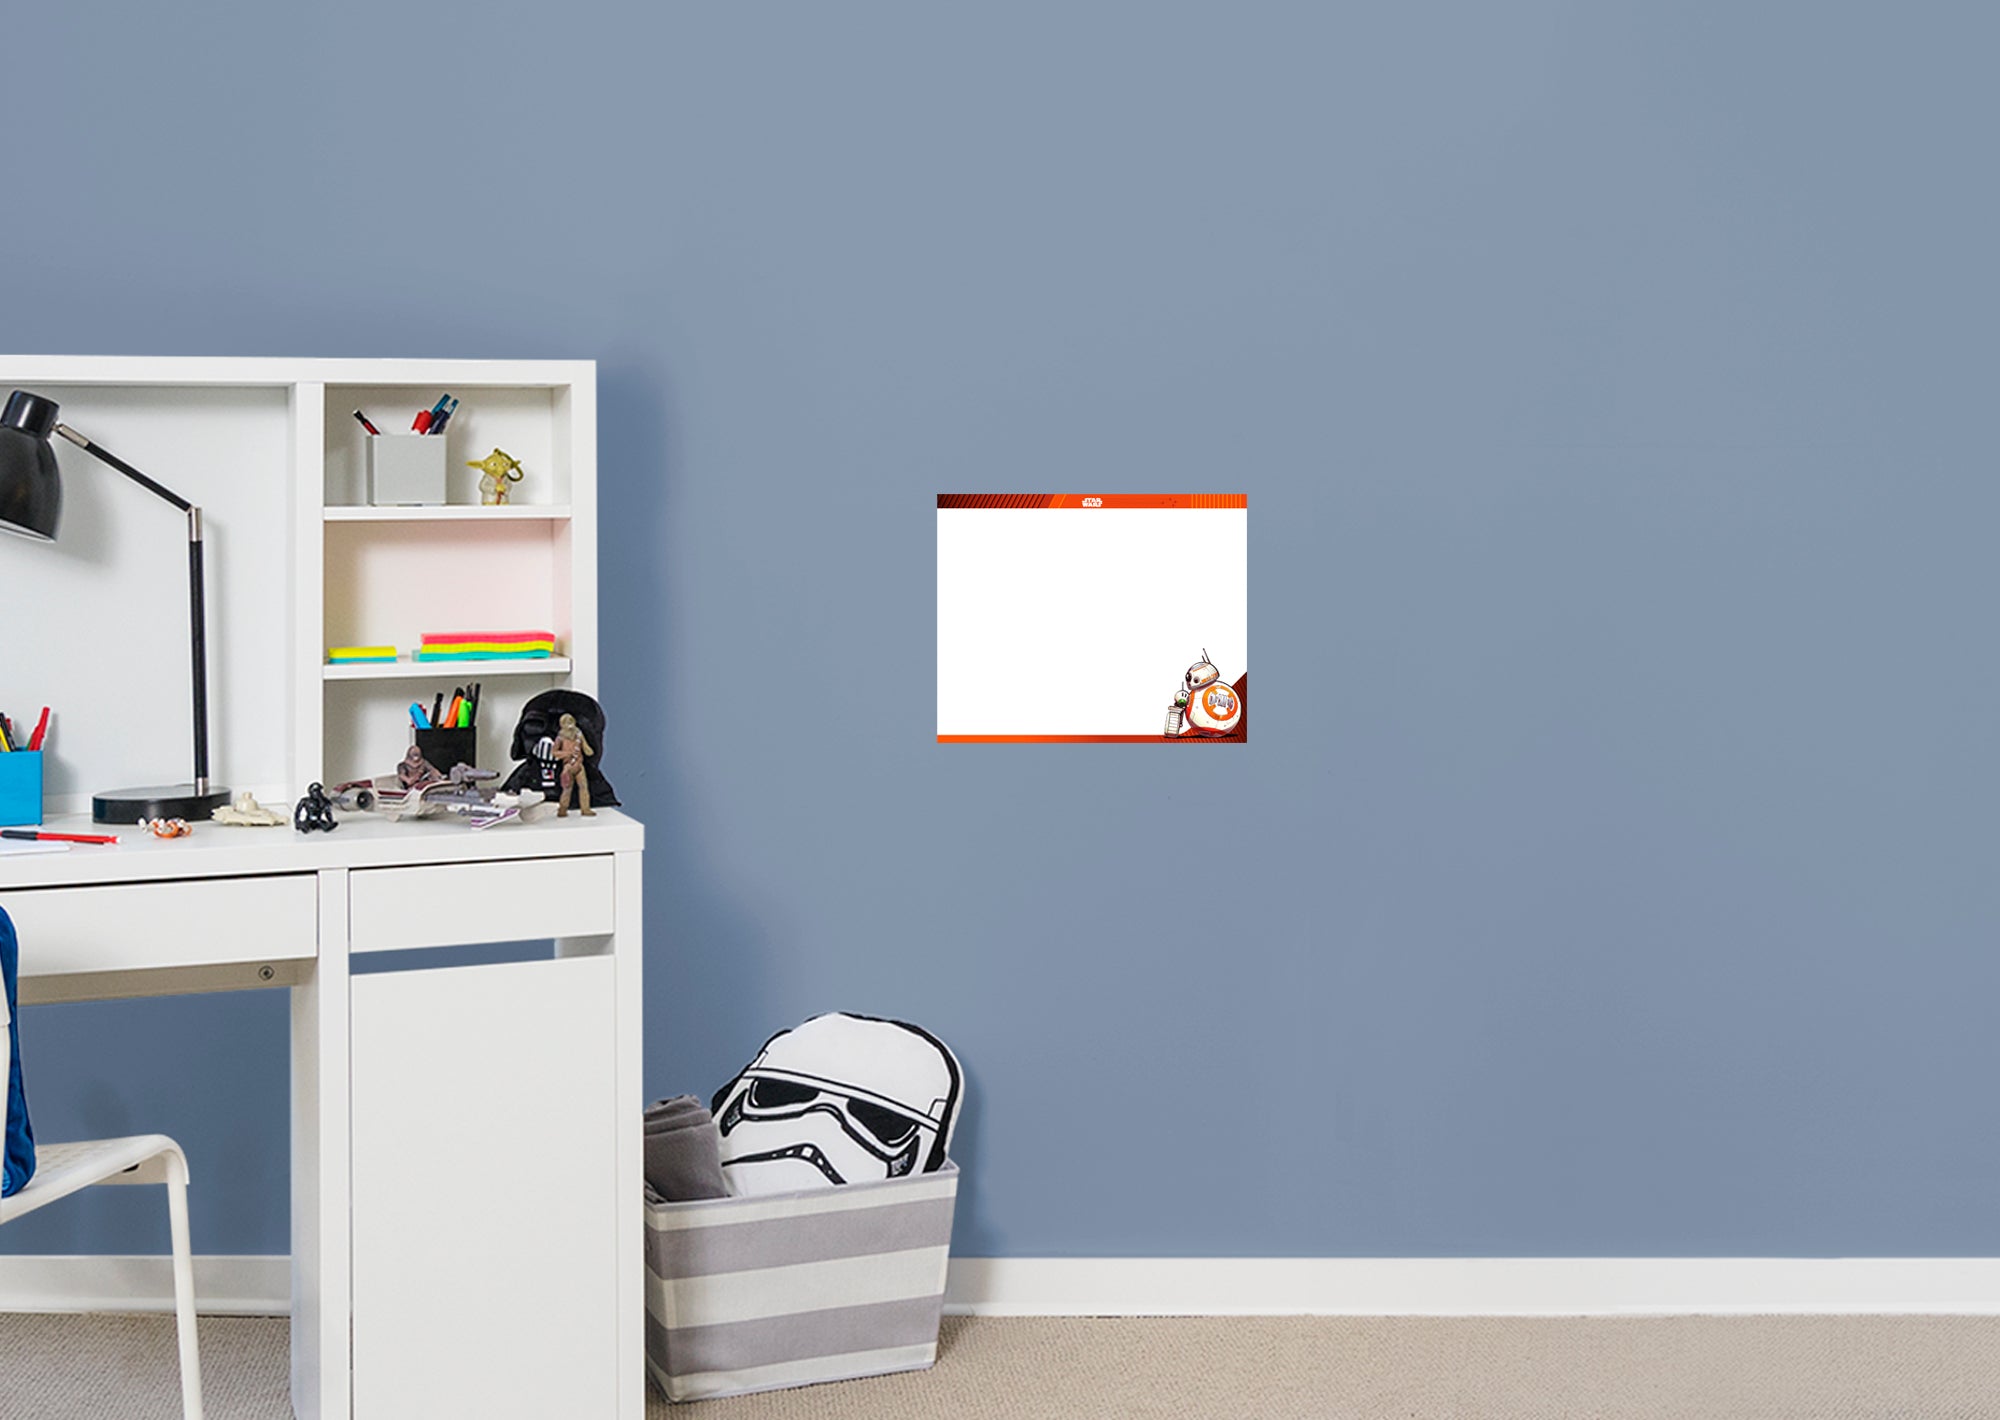 BB8 Whiteboard - Officially Licensed Star Wars Removable Wall Decal Large by Fathead | Vinyl